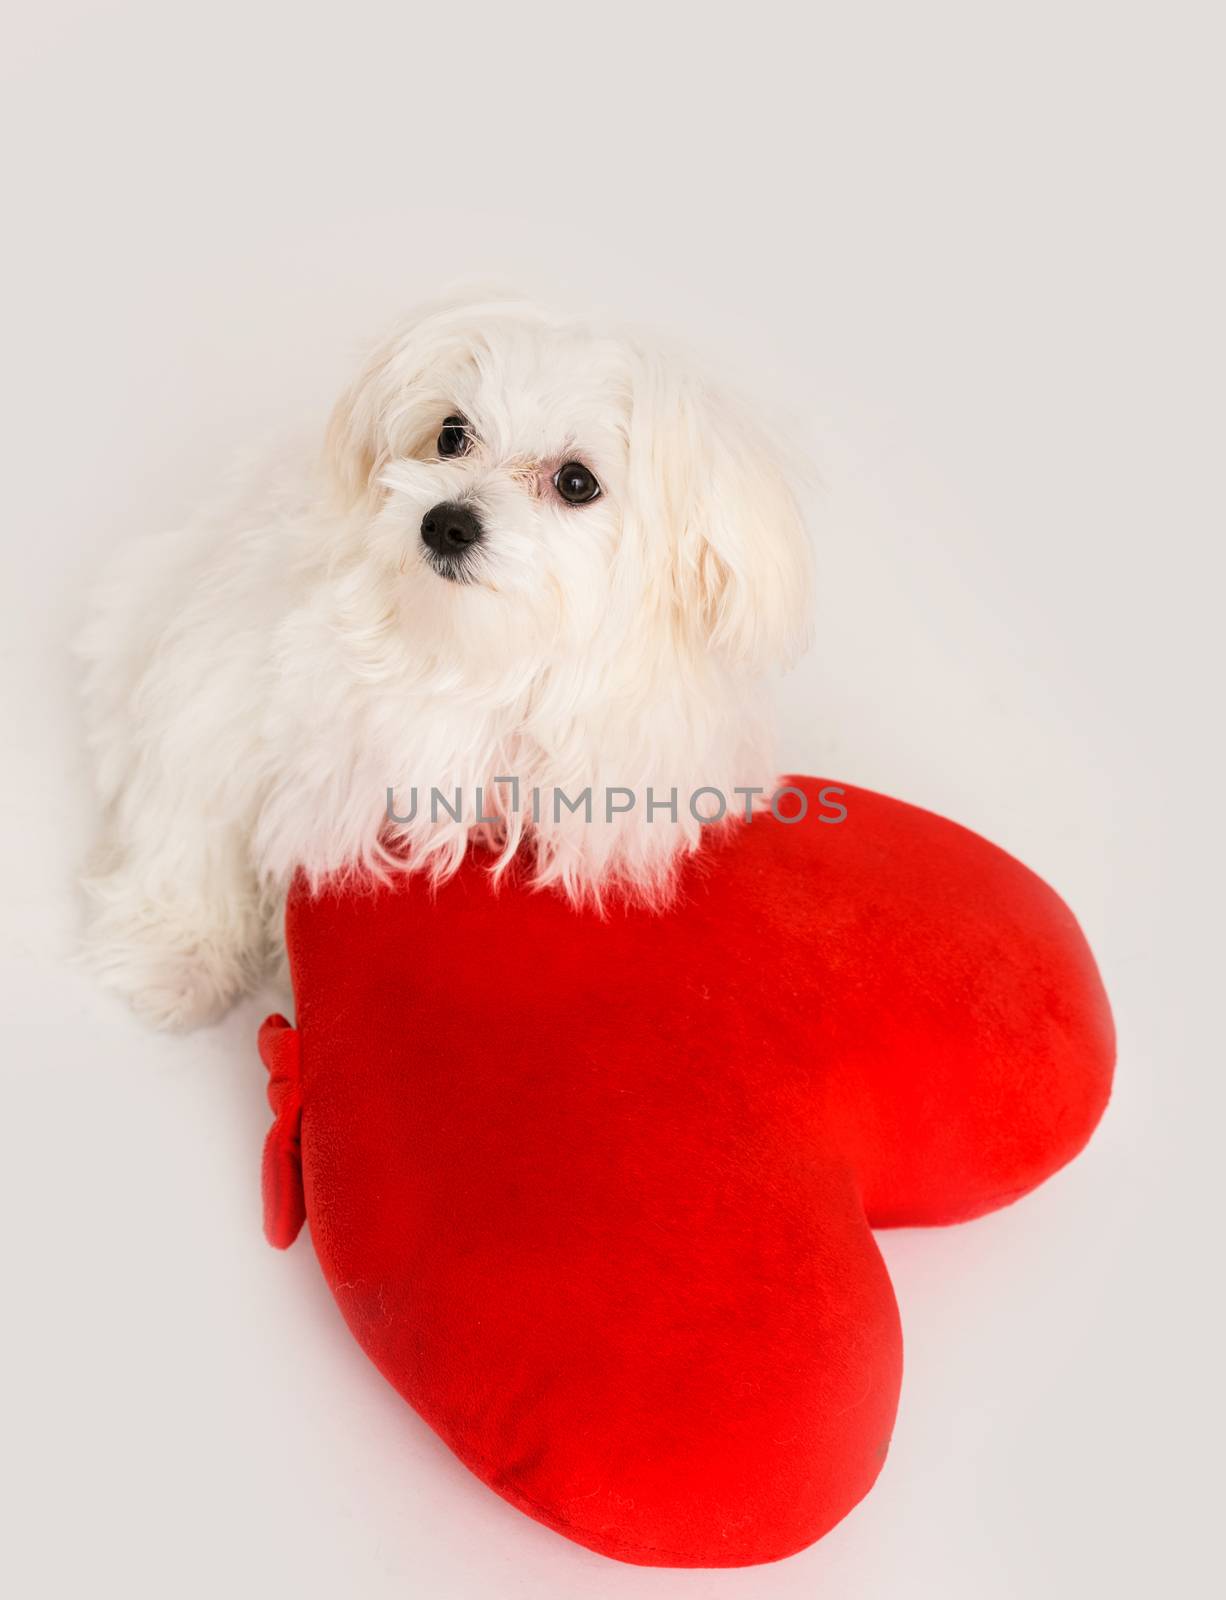 Bichon puppy dog in studio posing with a toy heart